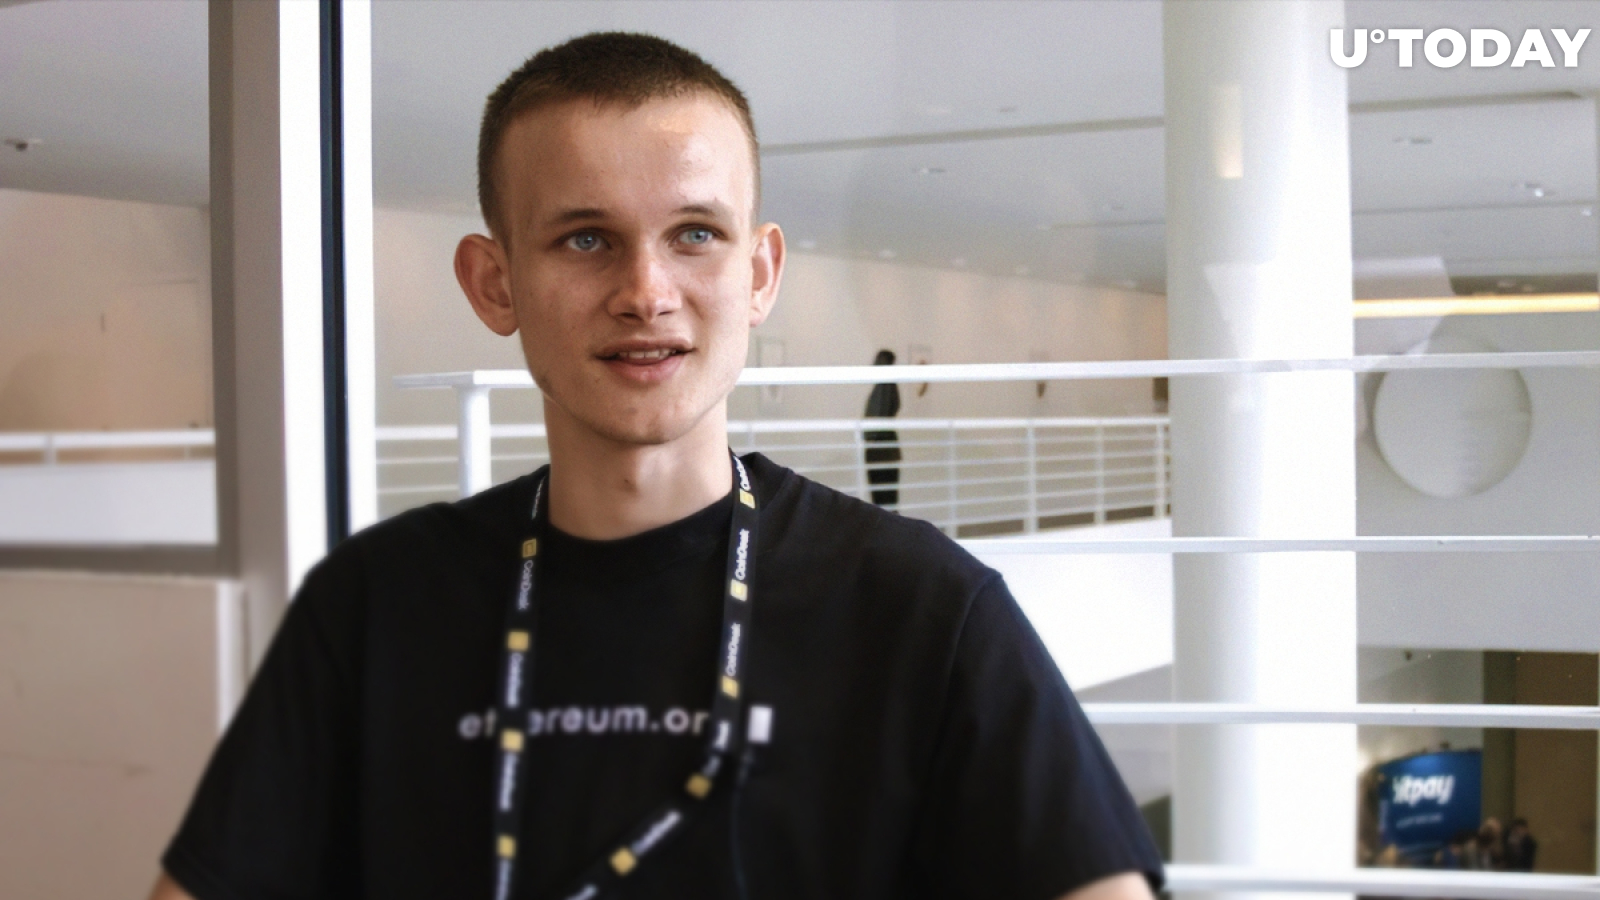 You Can Be in Ethereum Without Participating in "Latest Hot DeFi Thing": Vitalik Buterin